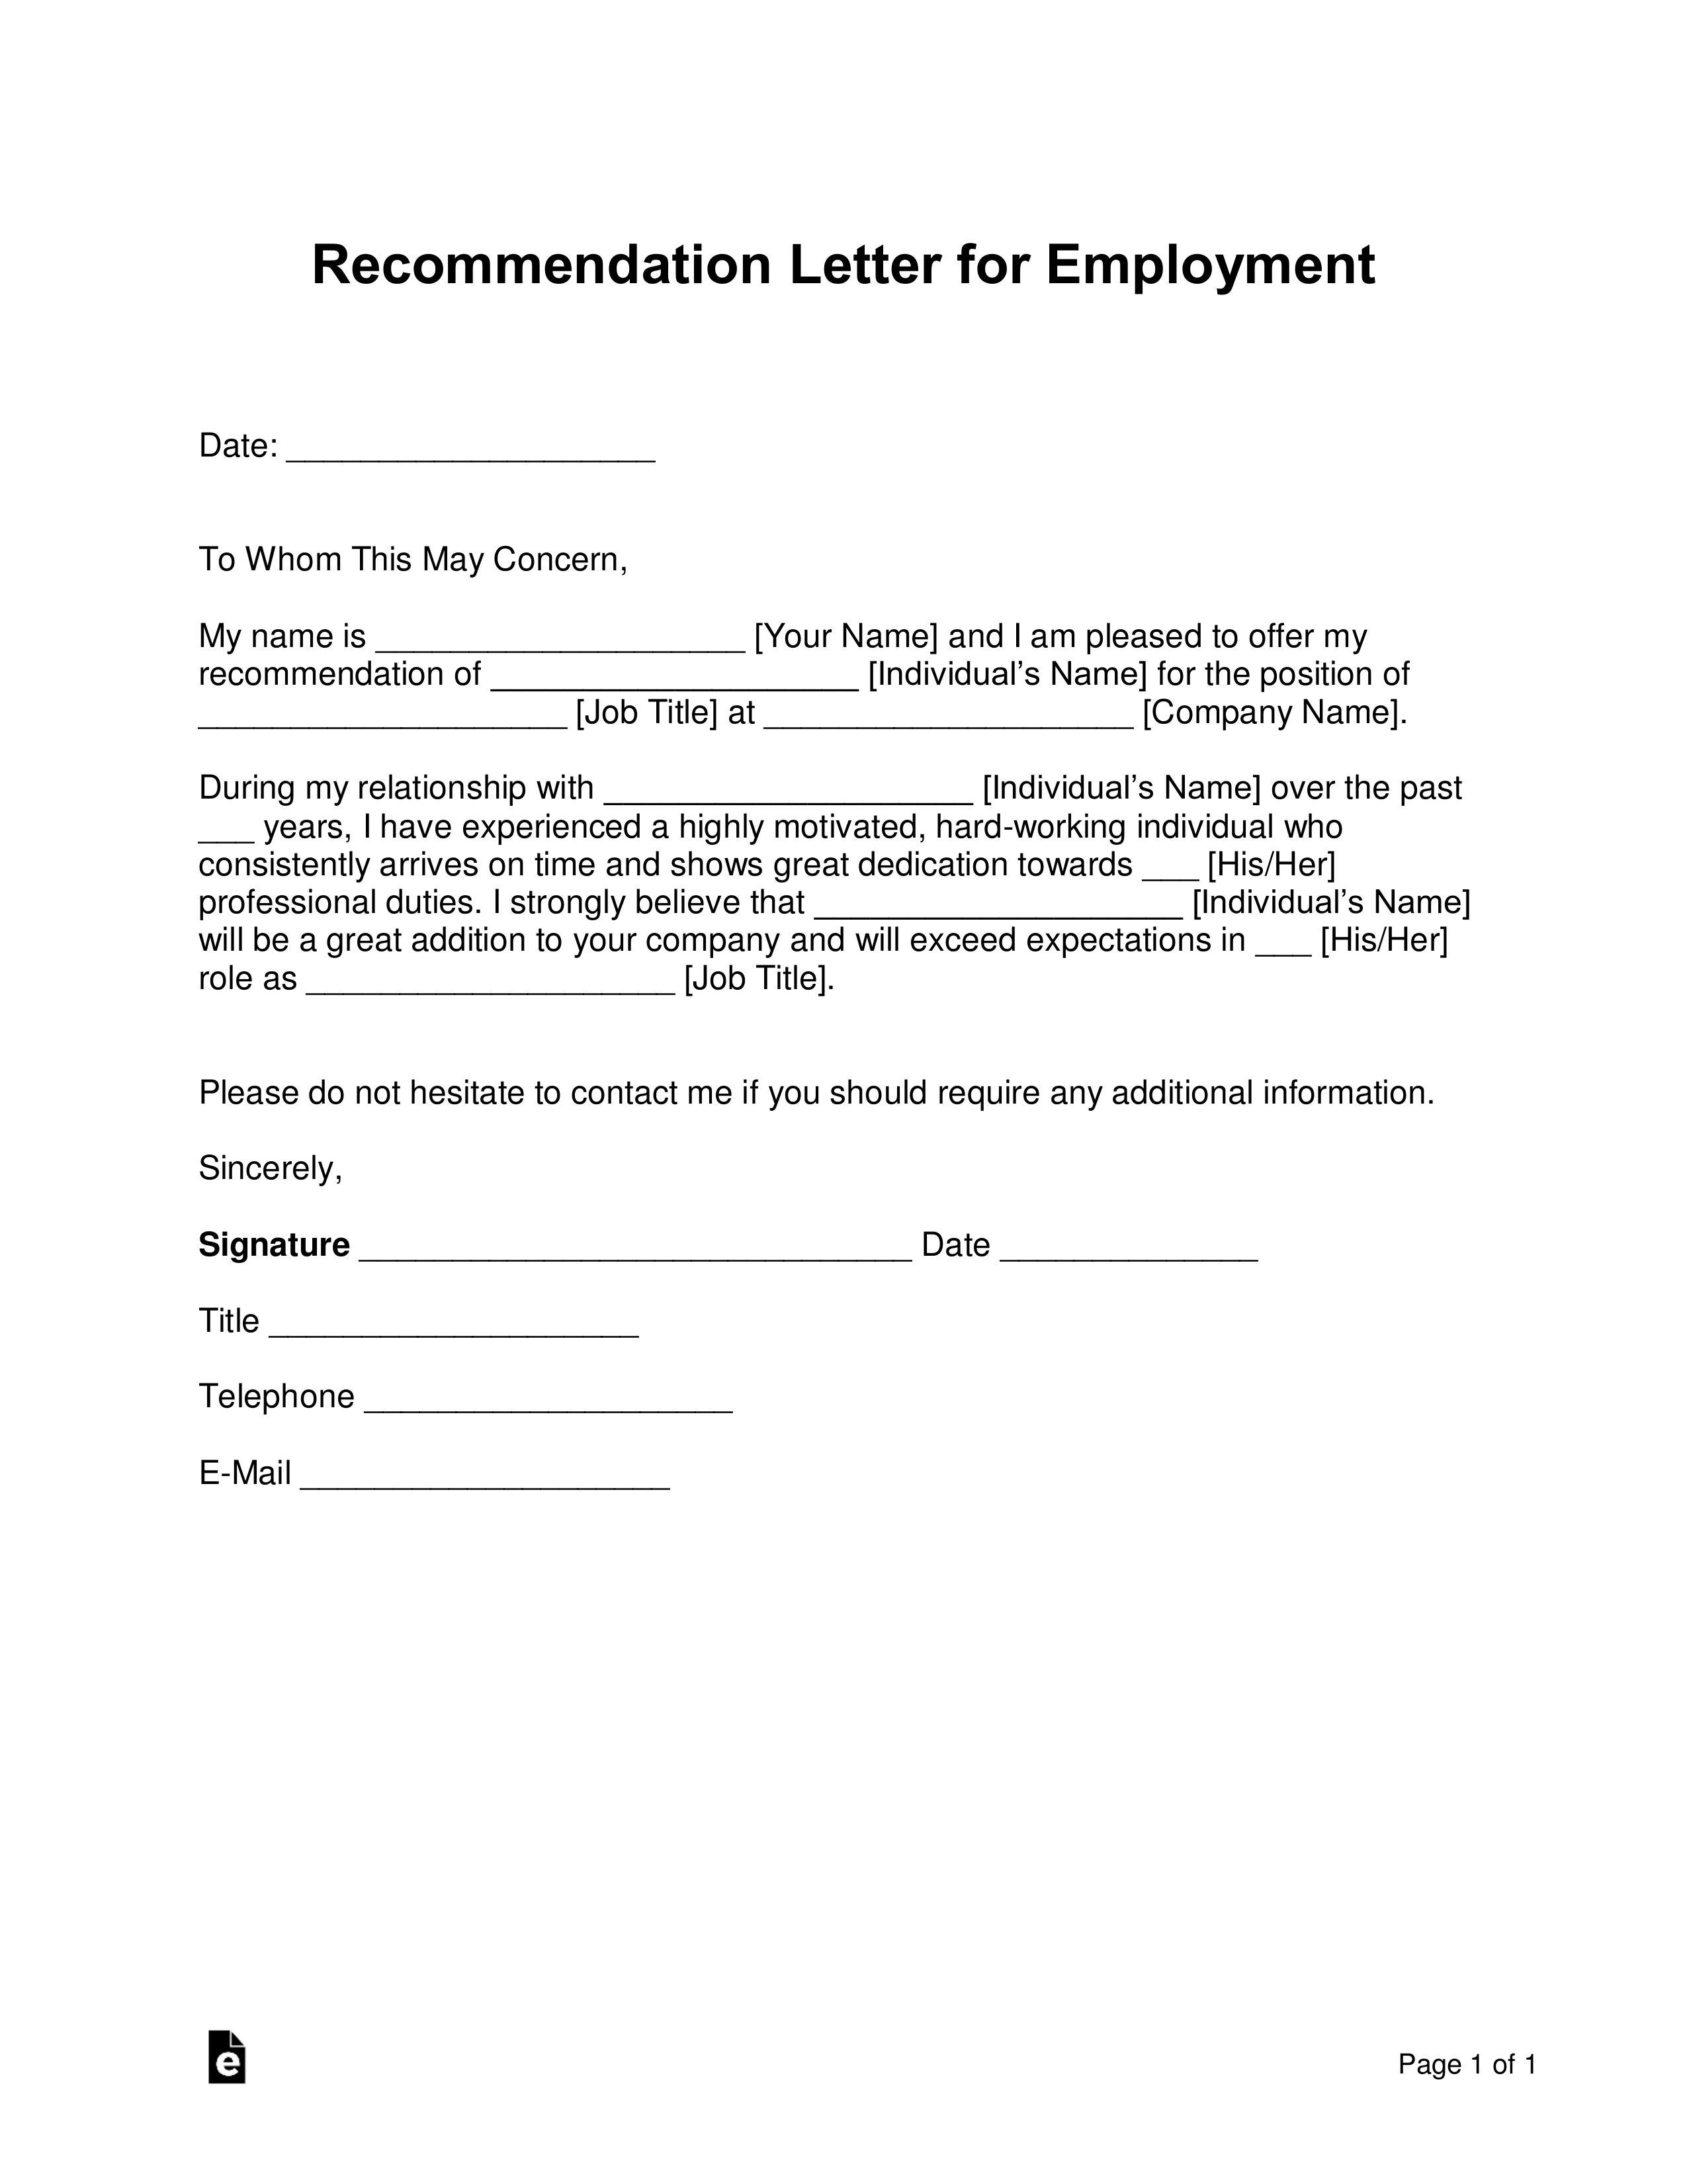 Personal recommendations for jobs